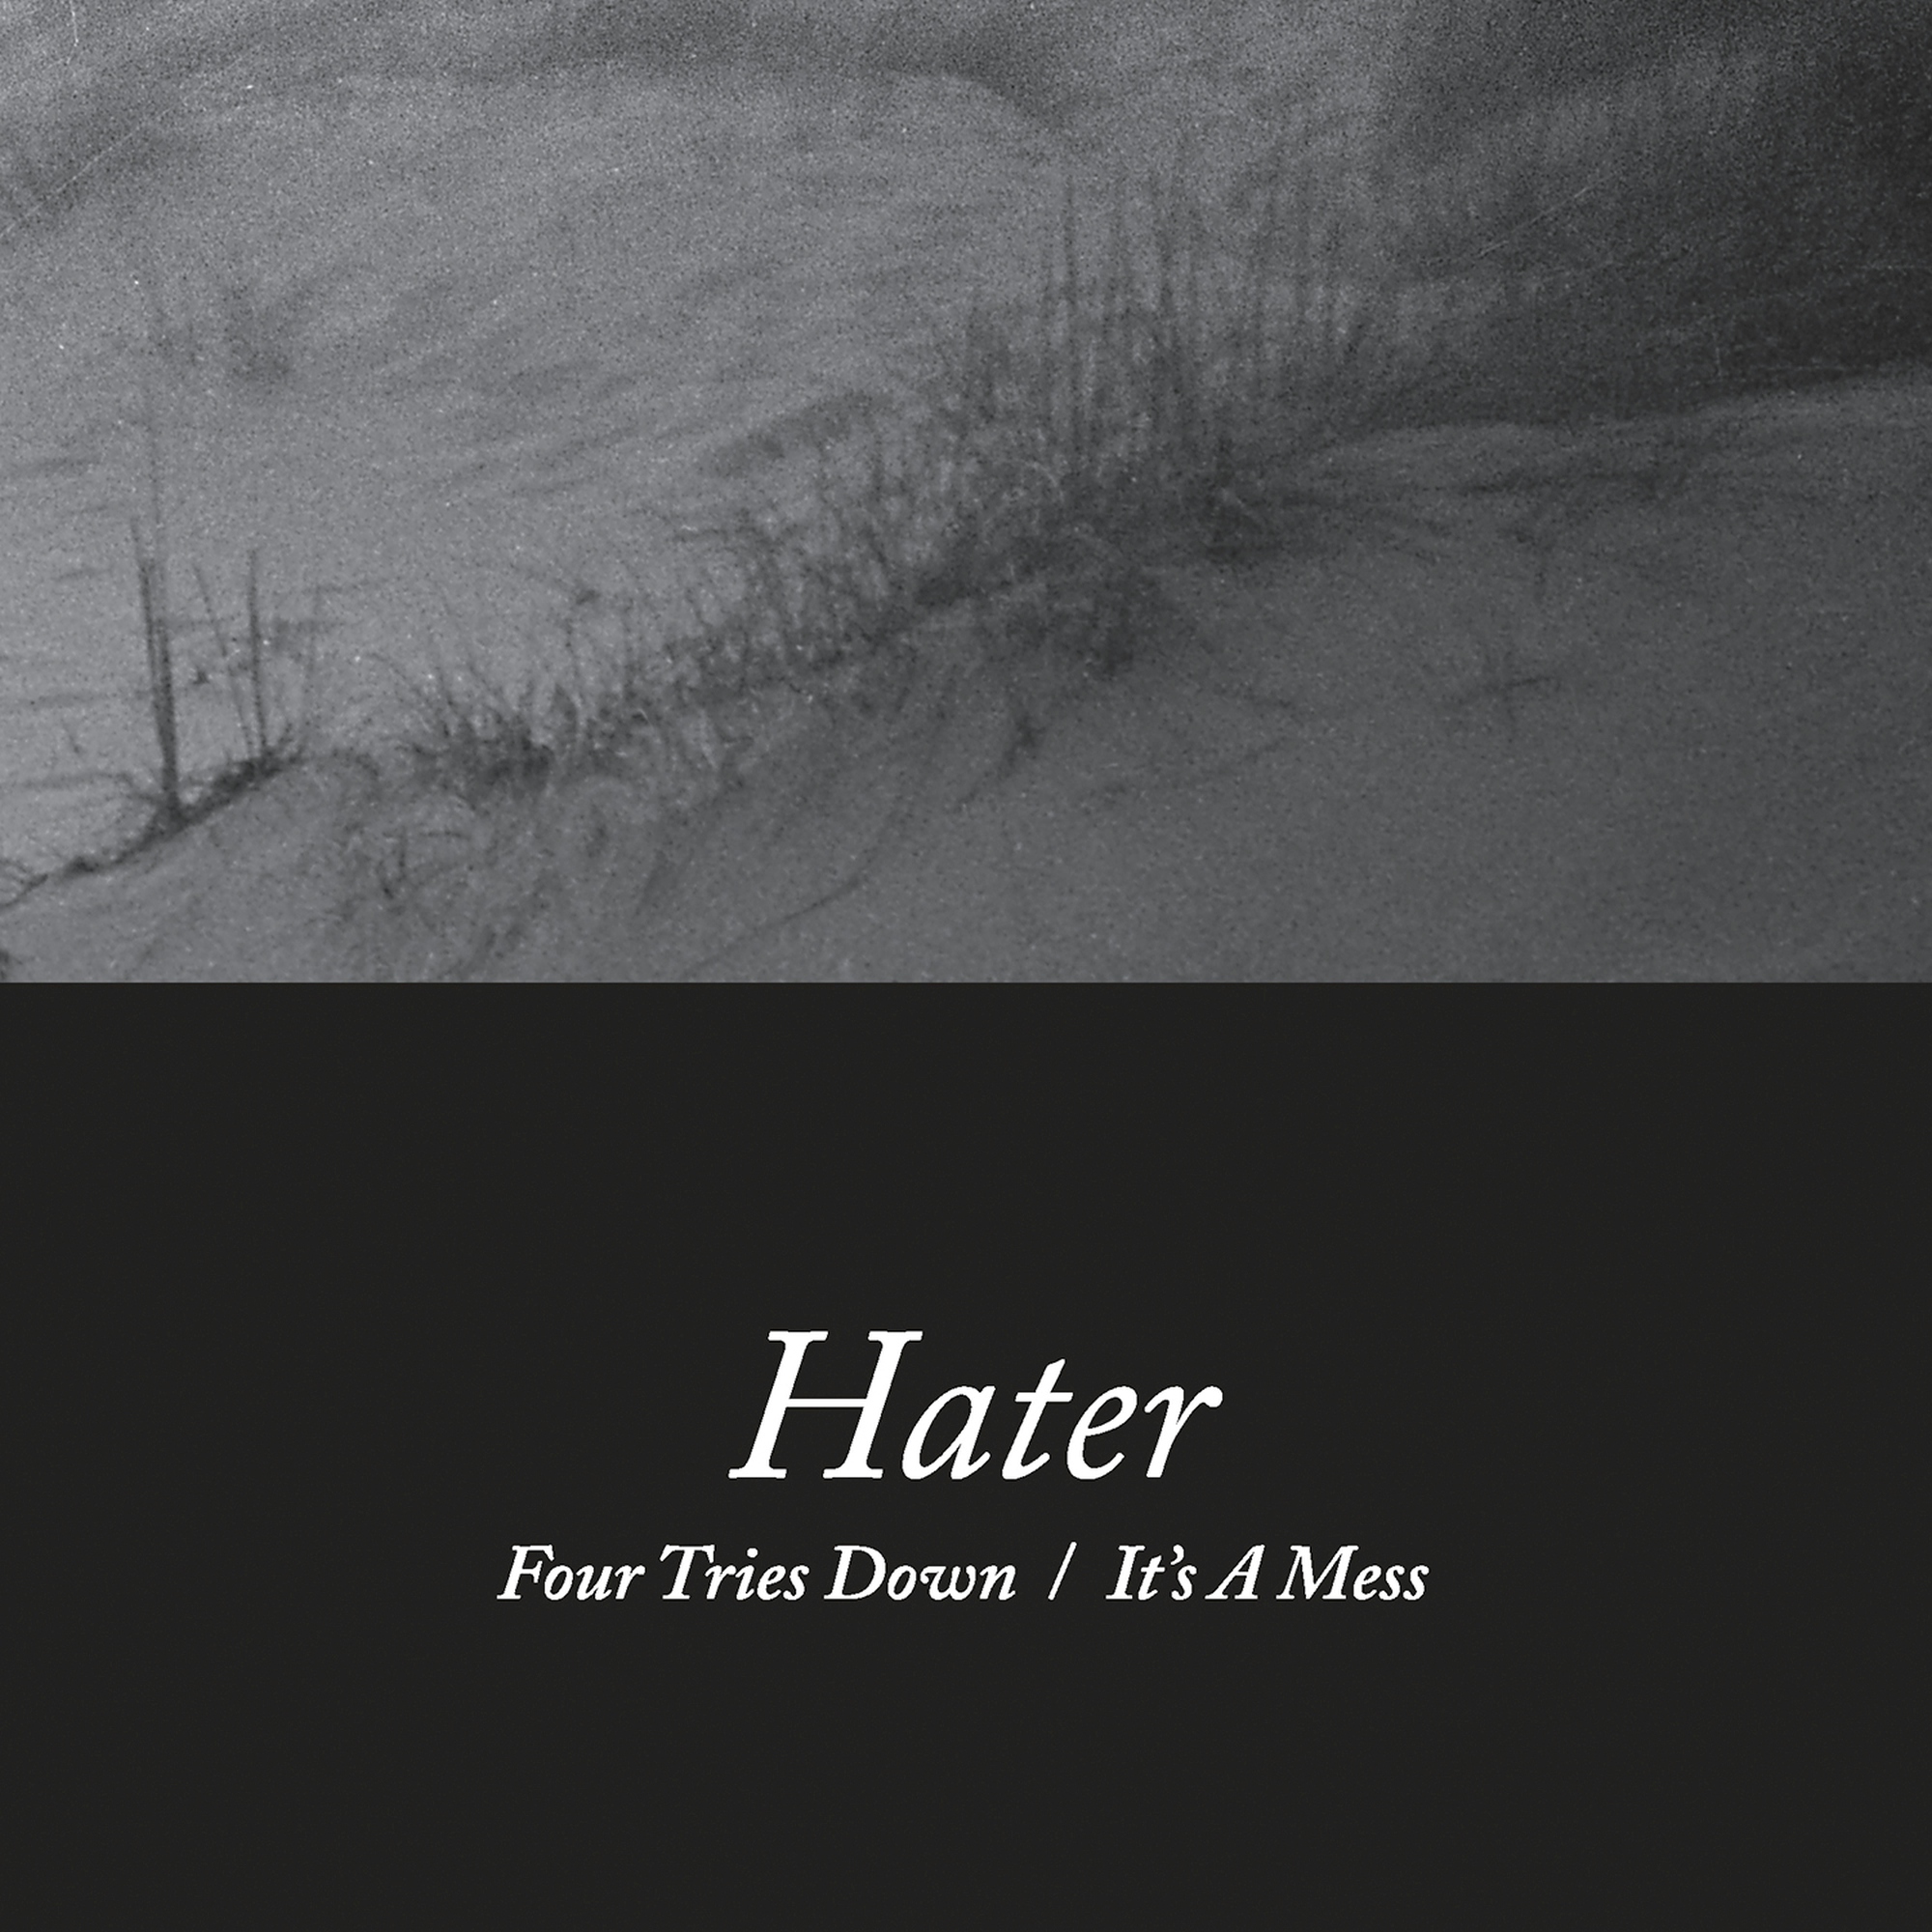 Album artwork for Four Tries Down / It’s A Mess by Hater